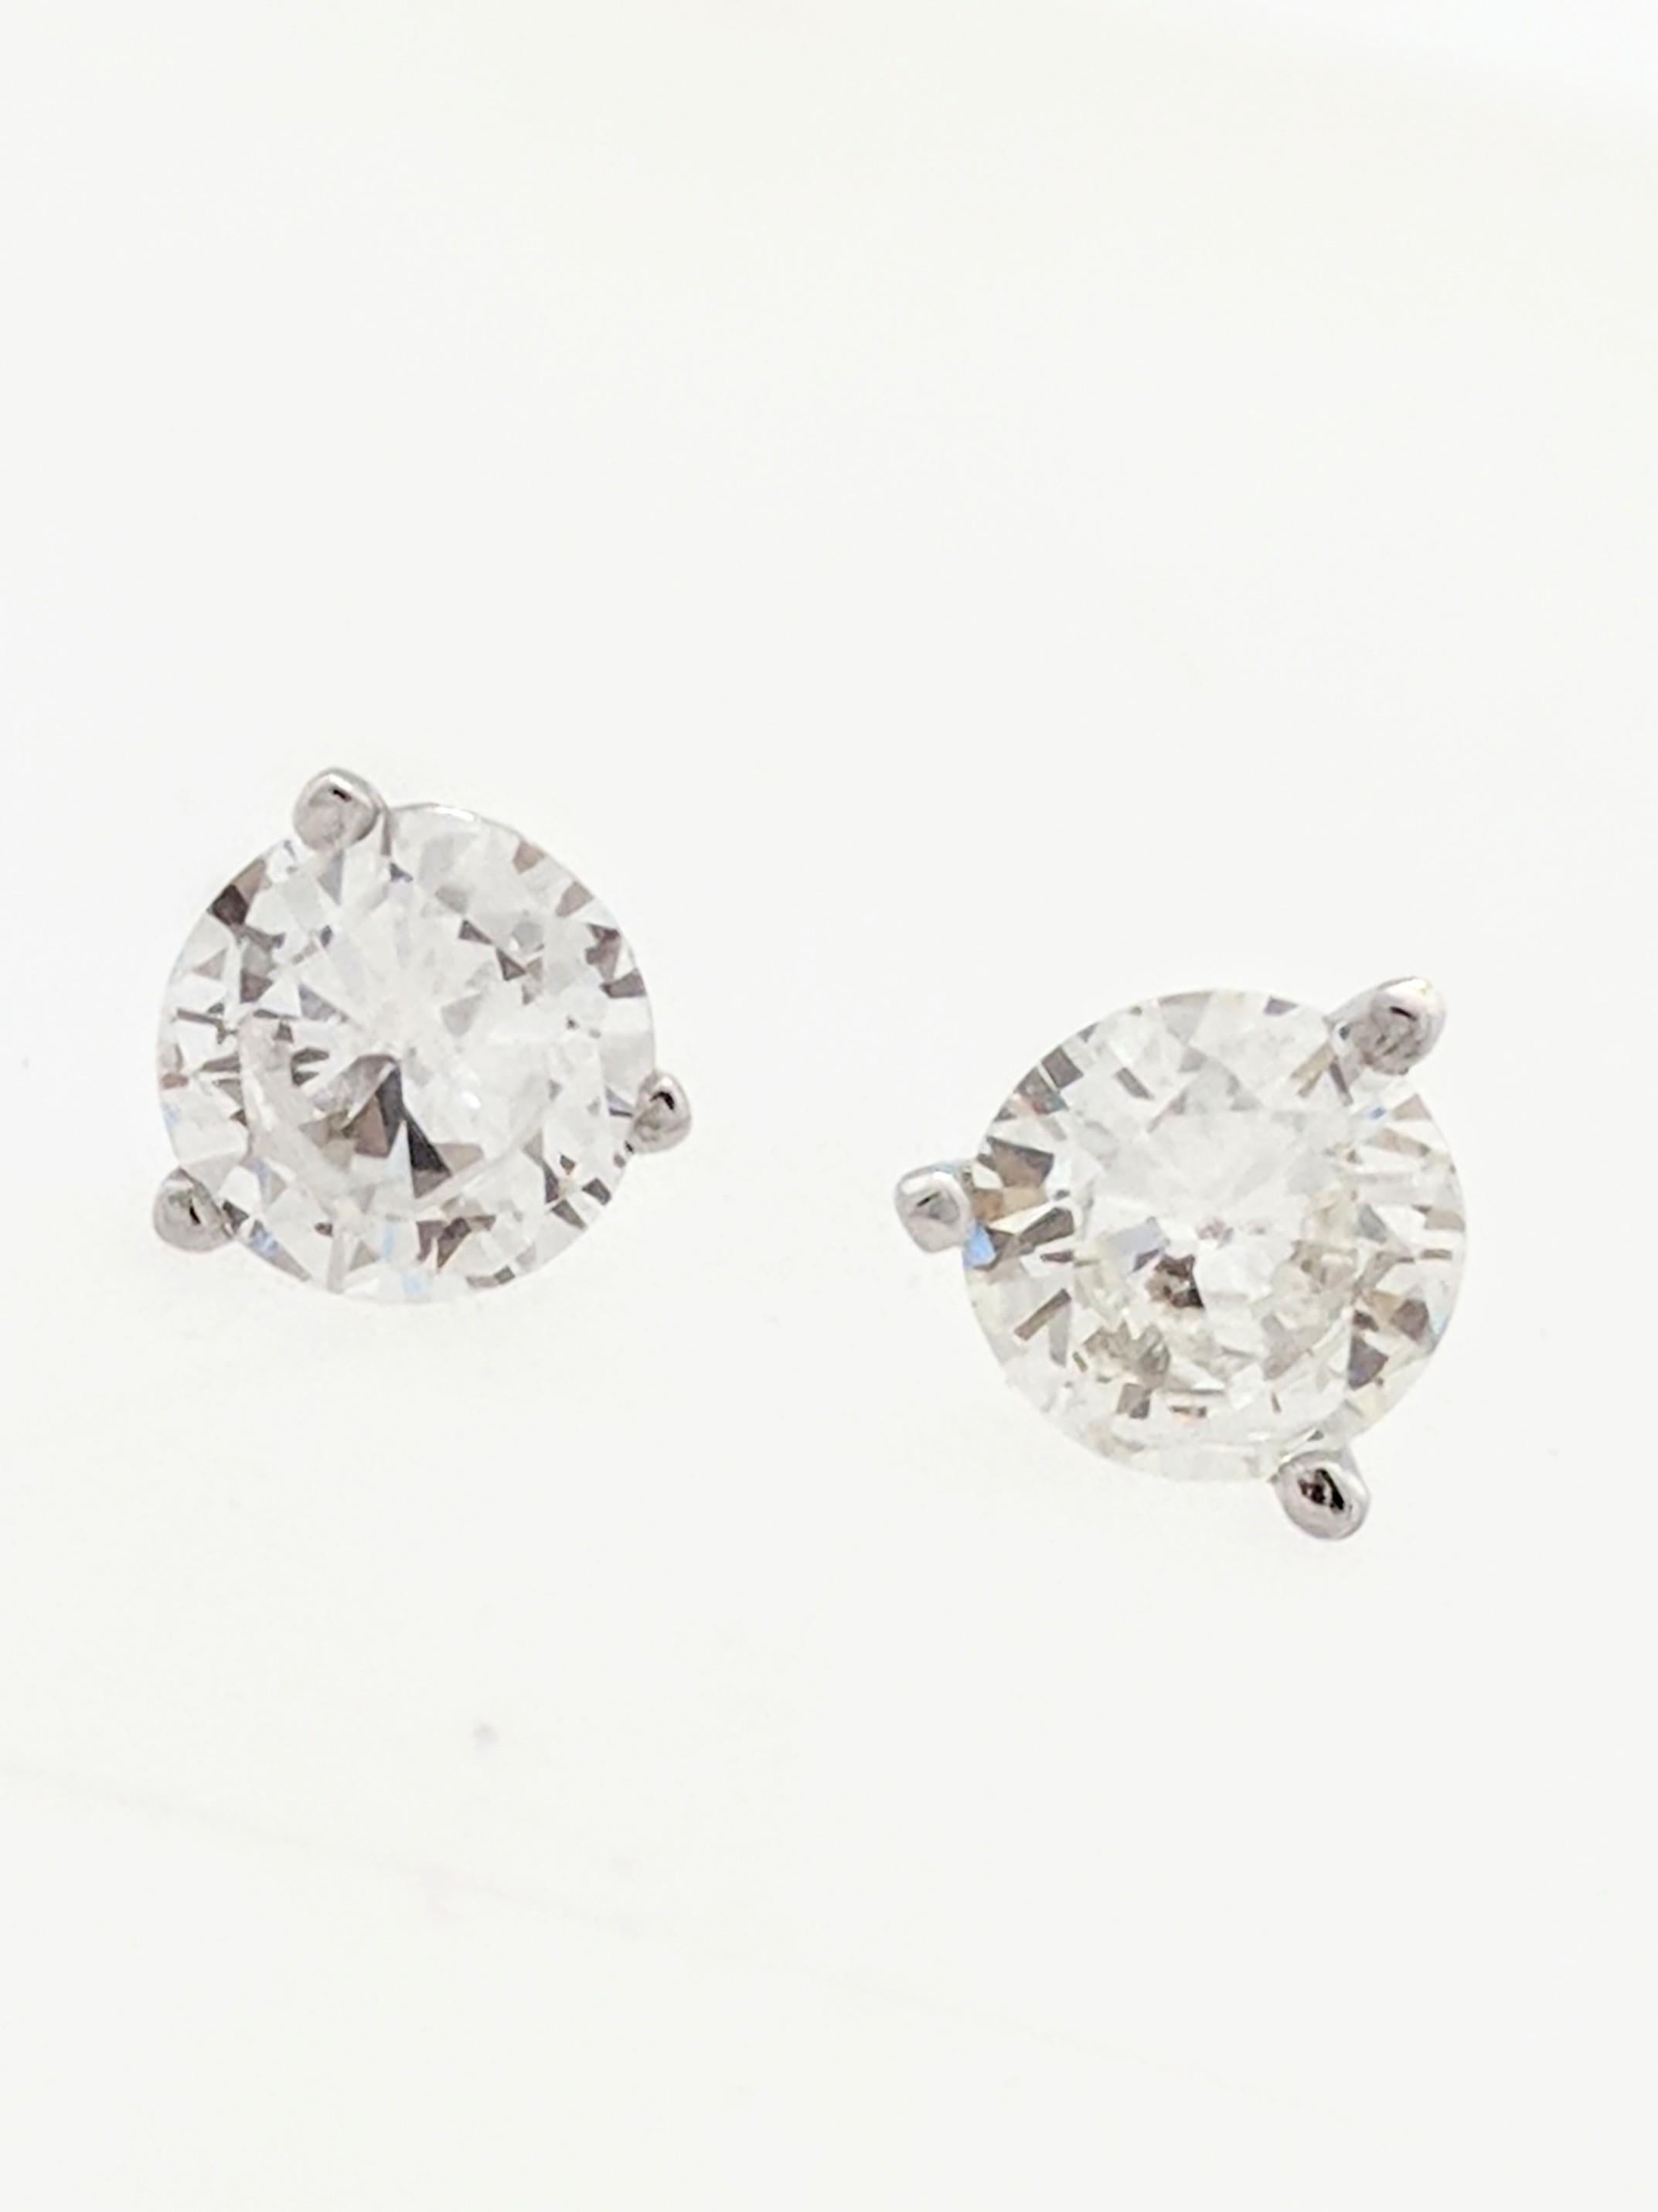 You are viewing a Beautiful Pair of Diamond Stud Earrings. These earrings are crafted from 14k white gold and weighs .9 grams. Each earring features approximately (1) .40ct natural round diamond which measures 5mm for an estimated .80tcw. The